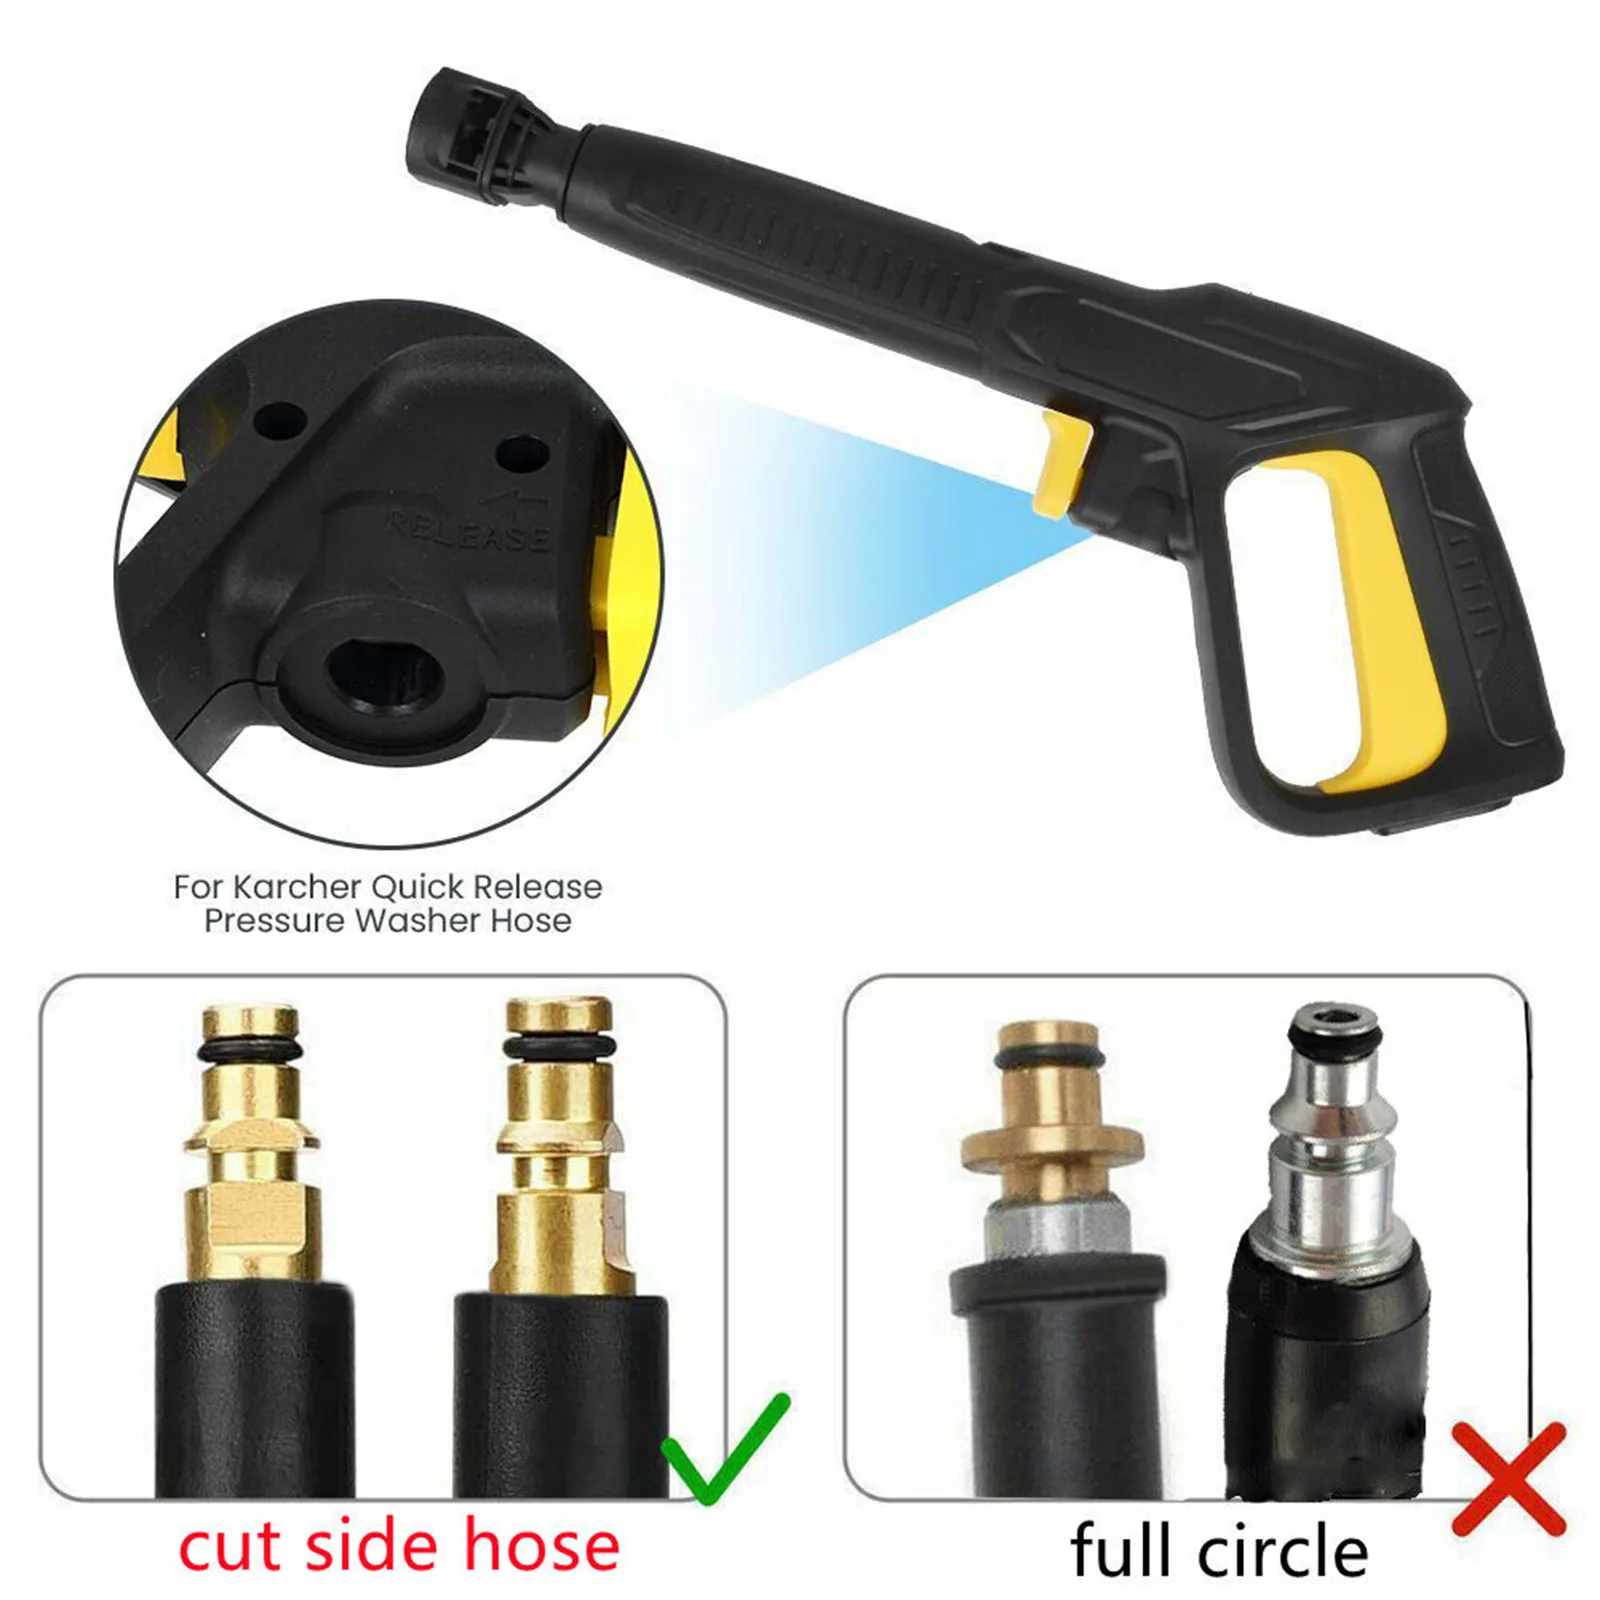 For Karcher K High Power Pressure Washer Gun Extension Wand Nozzle Tips Foam Lance Surface Cleaner for Car Patio Yard Driveways